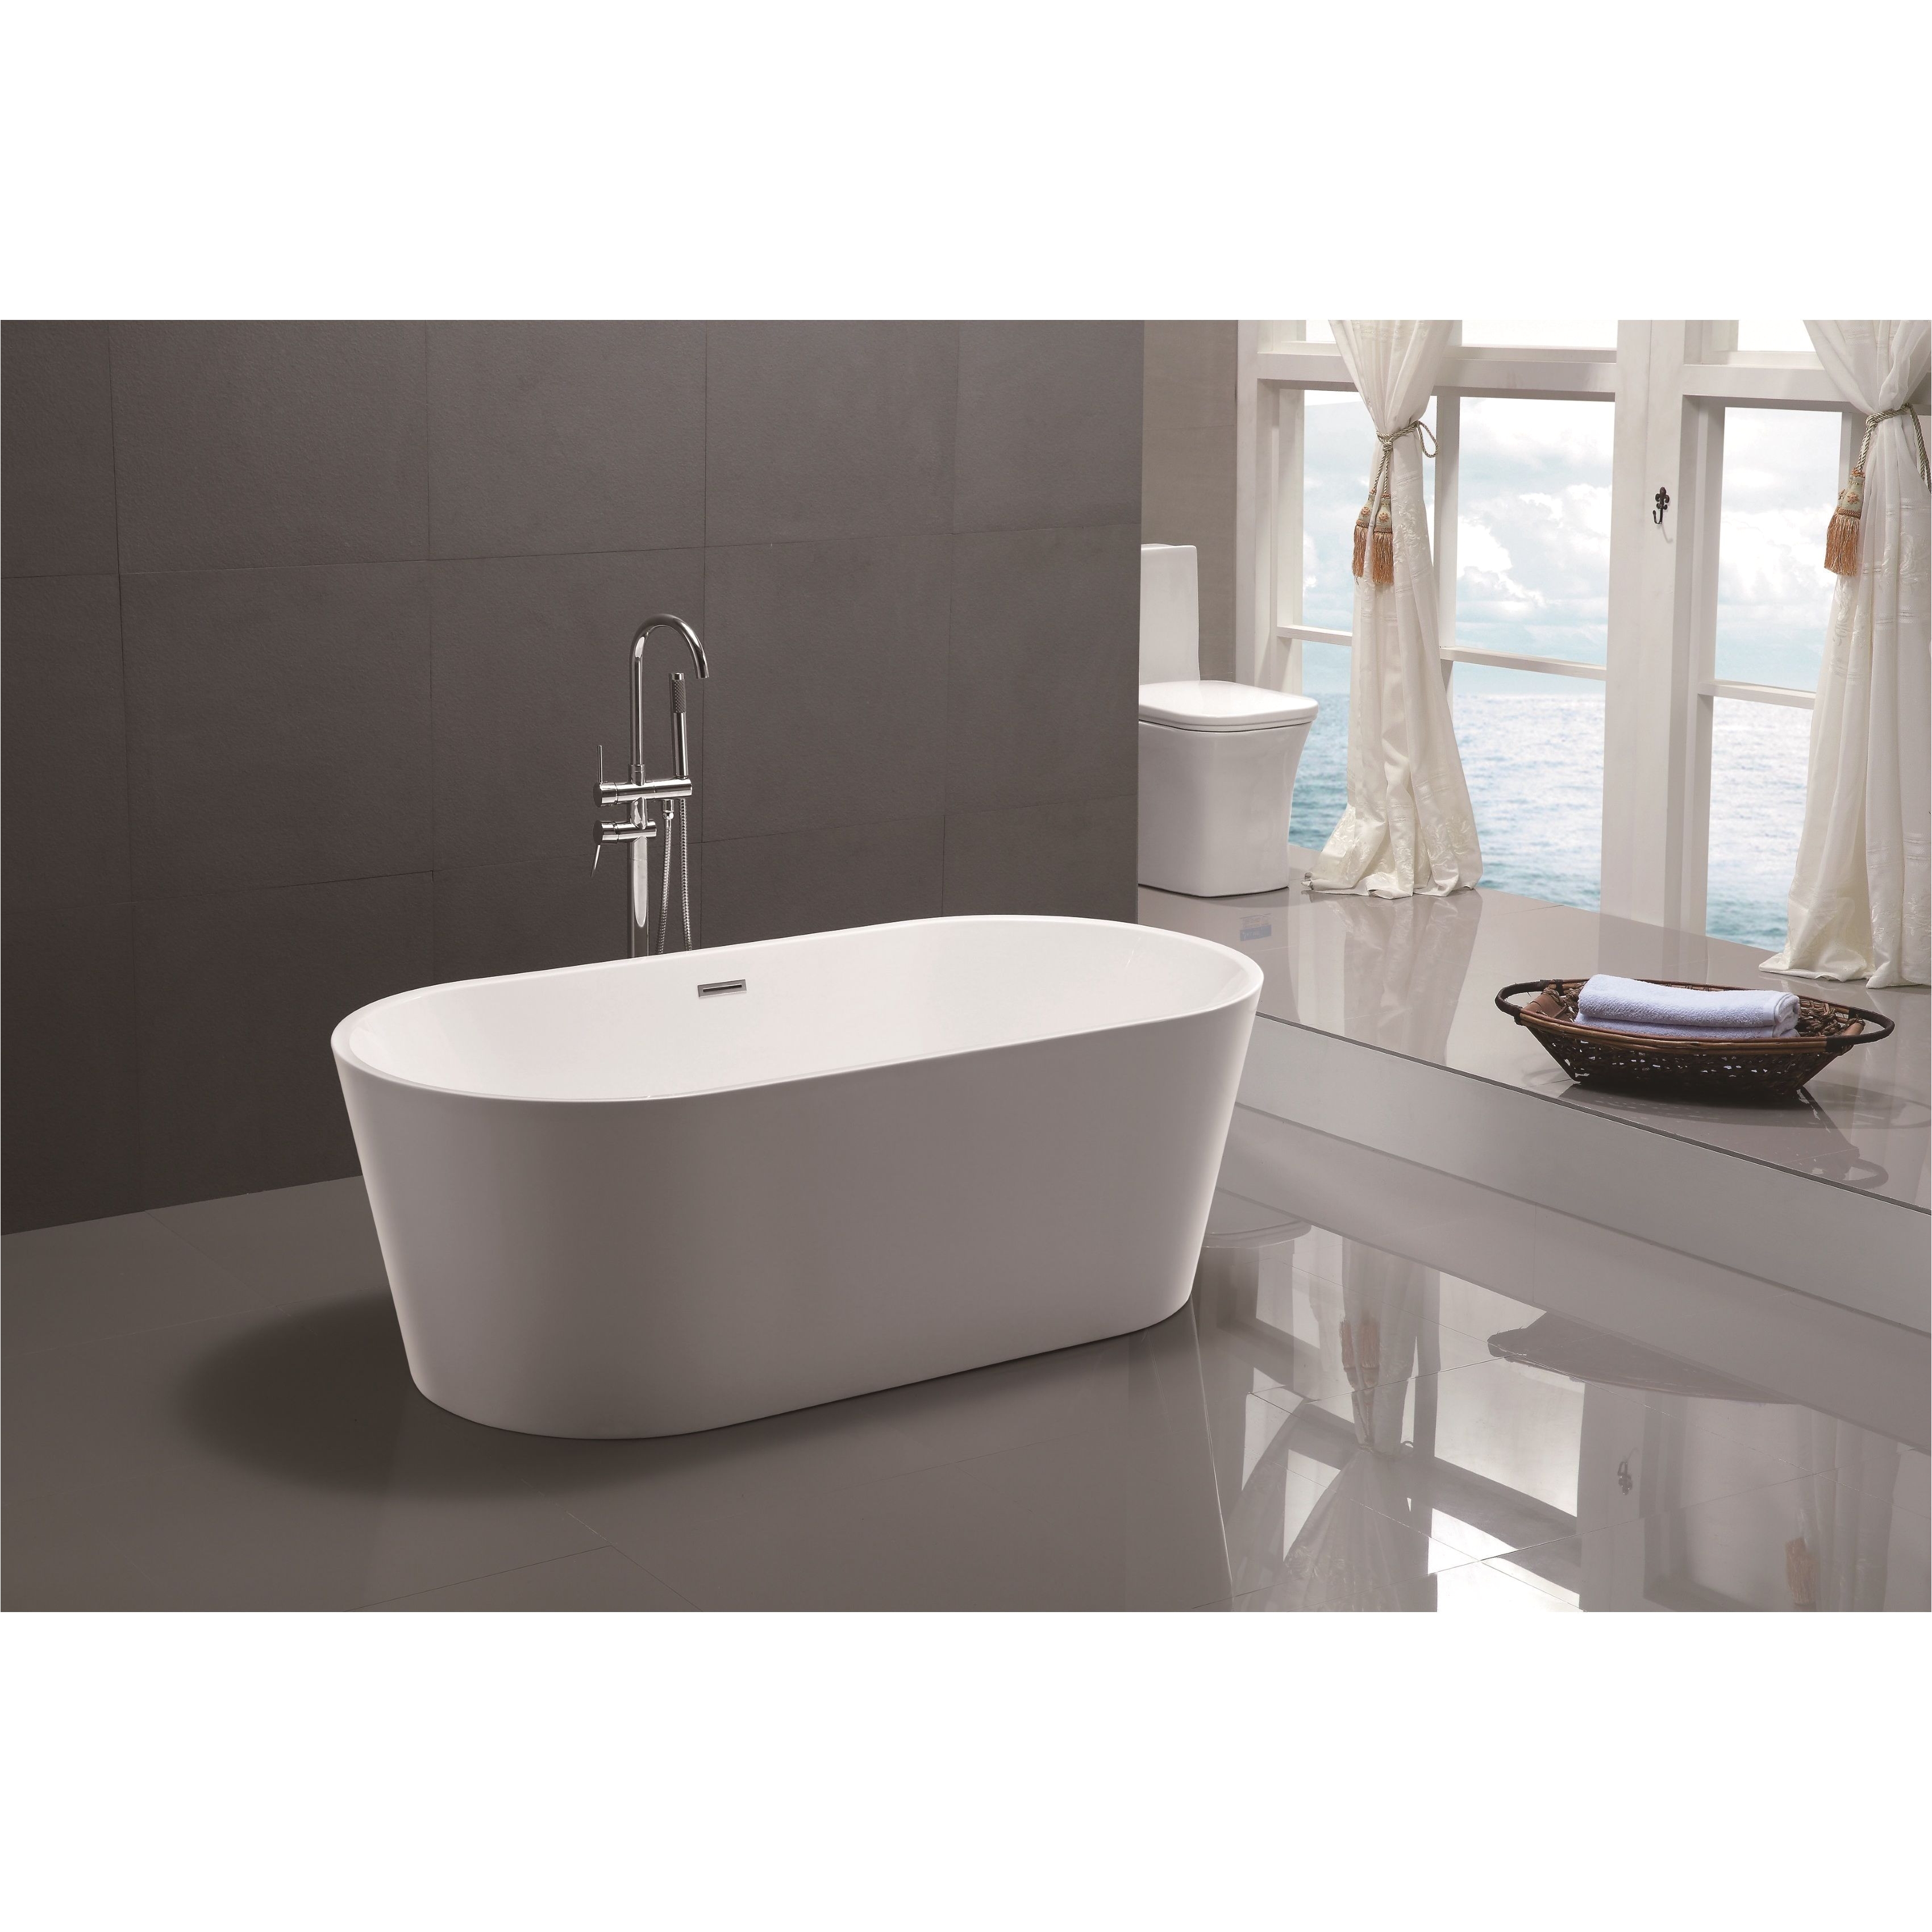 luxuriate in the indulgent beauty of this freestanding soaking bathtub from vanity art this white acrylic